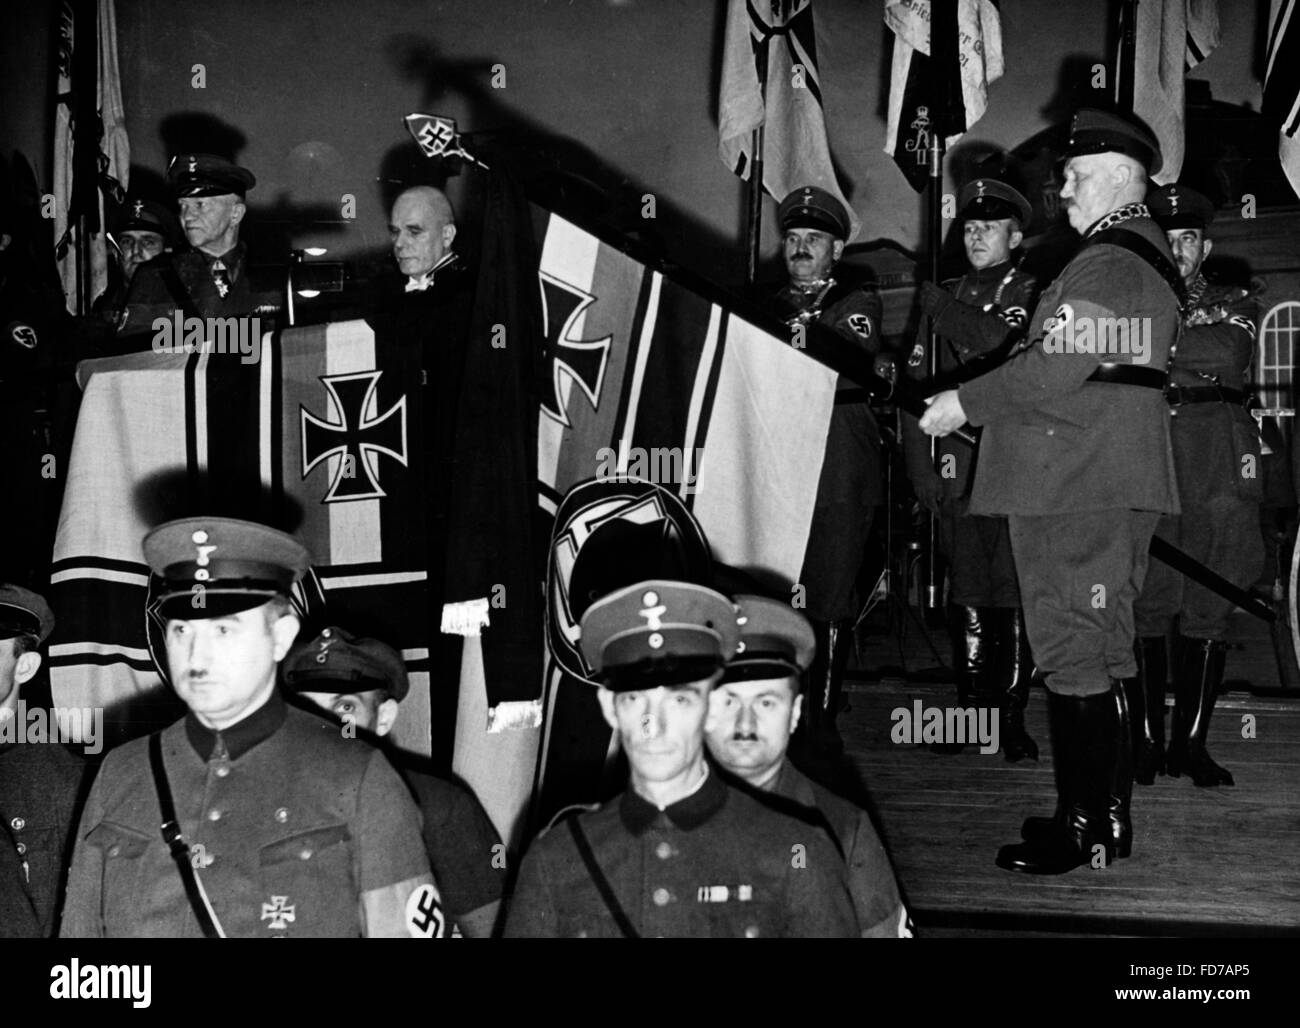 Consecration of flags in Berlin, 1934 Stock Photo - Alamy